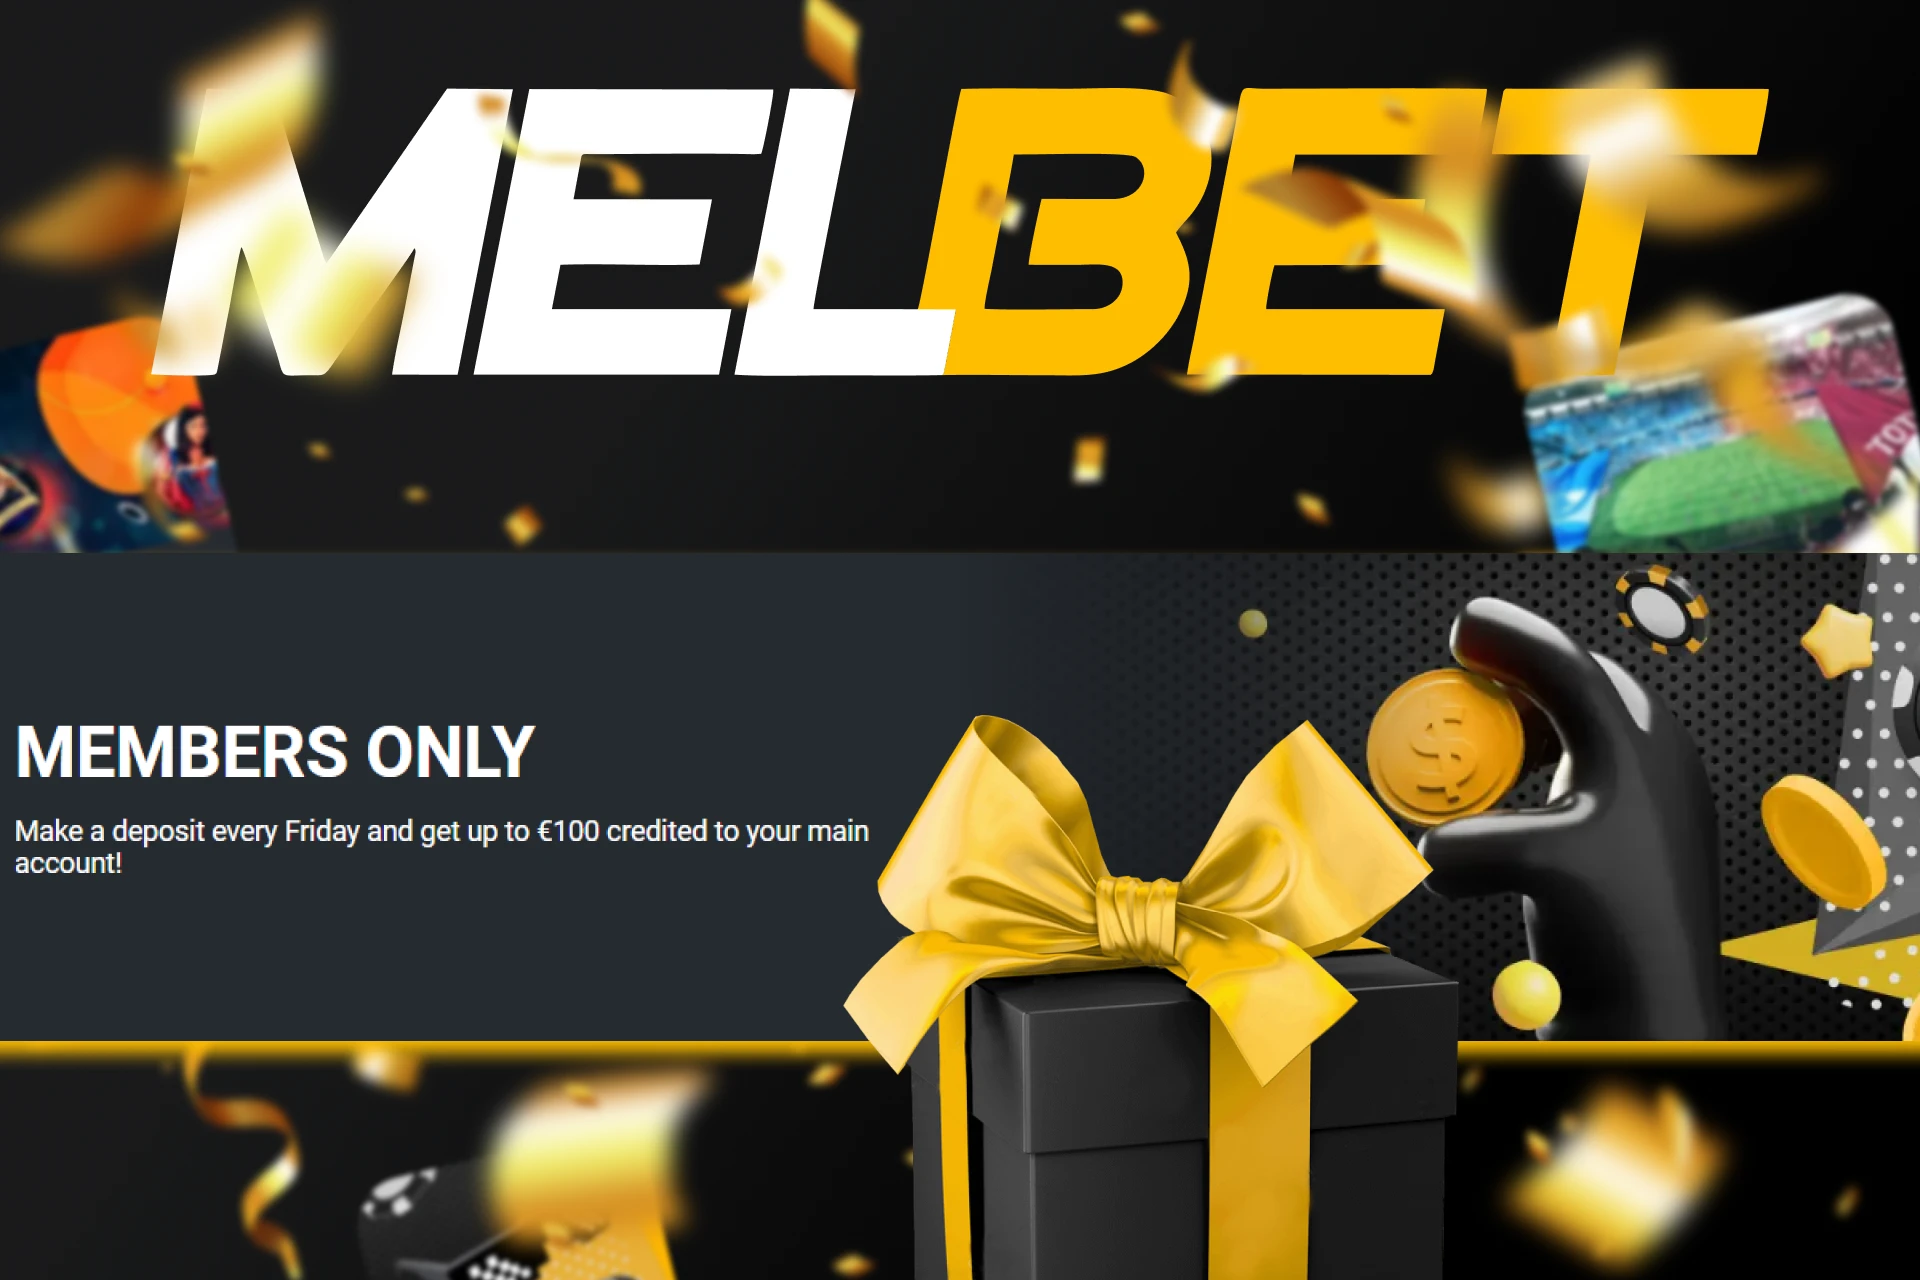 Deposit every Friday and get up to 12,000 BDT as a Melbet bonus.